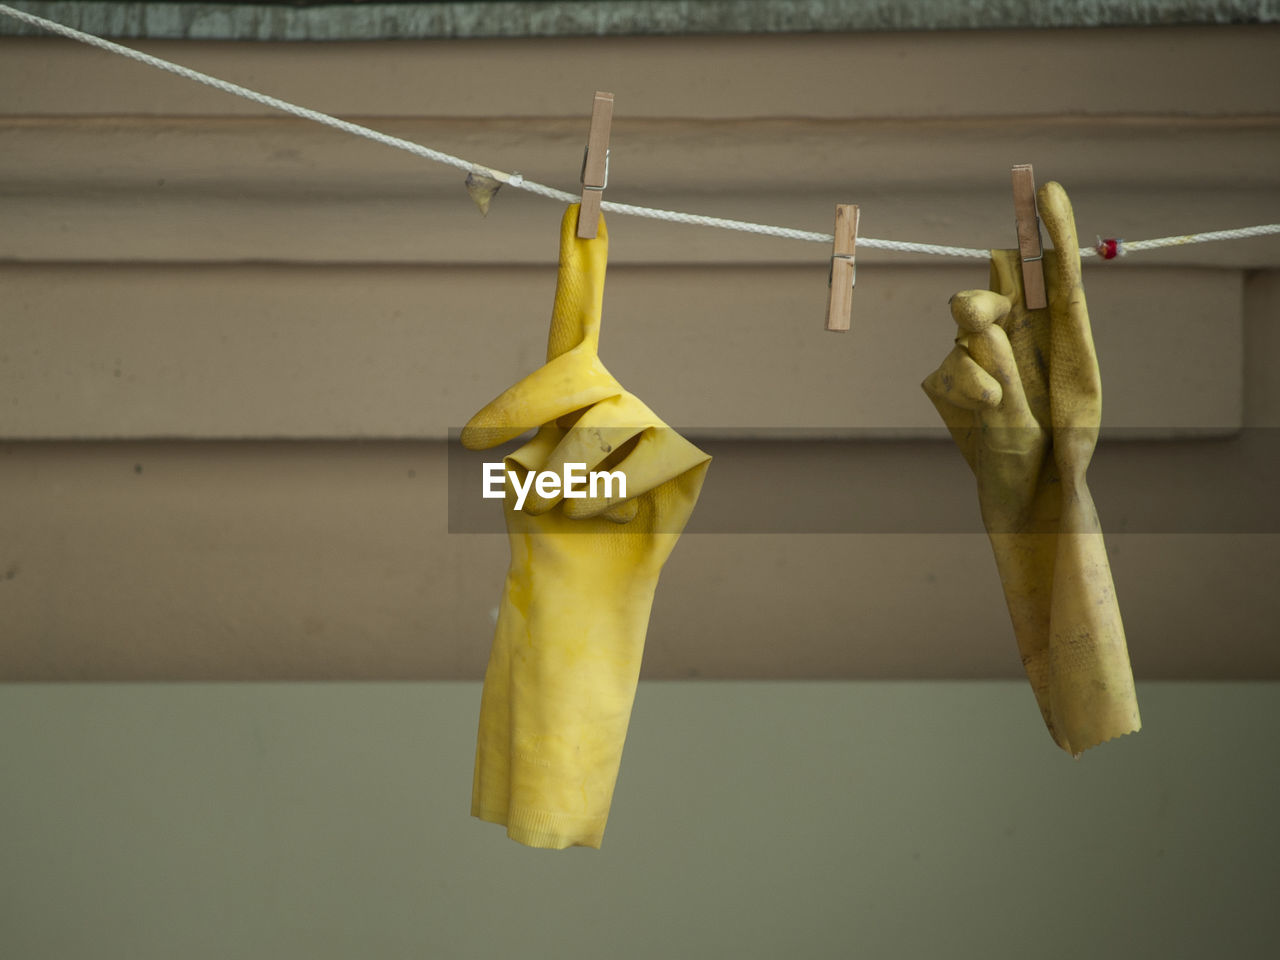 CLOSE-UP OF CLOTHES HANGING ON CLOTHESLINE AGAINST WALL